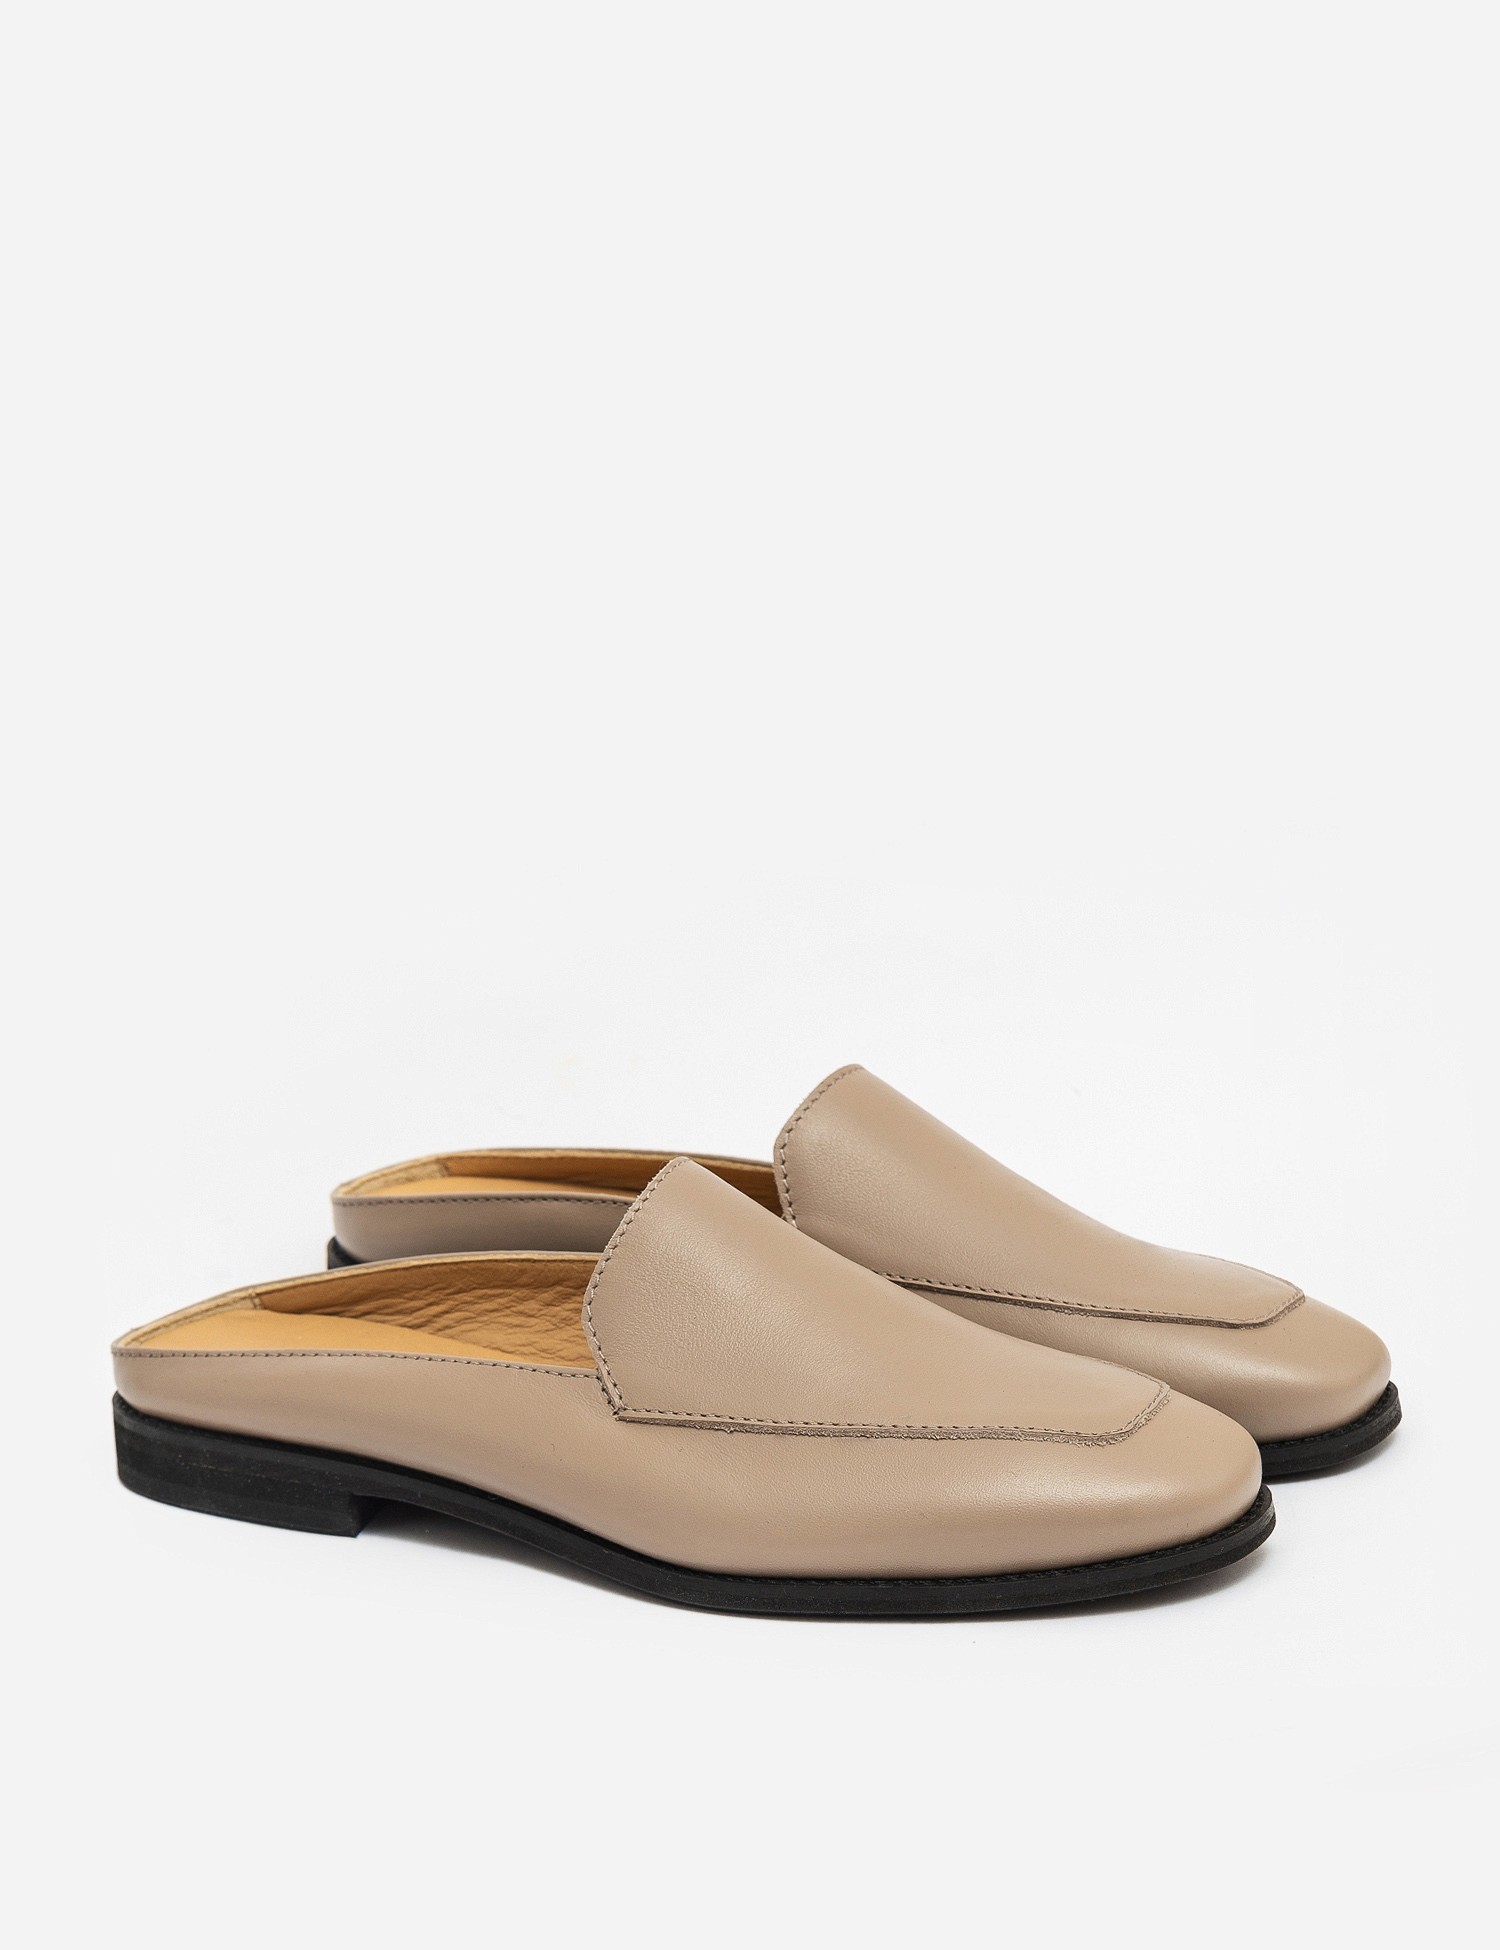 Women's leather mules